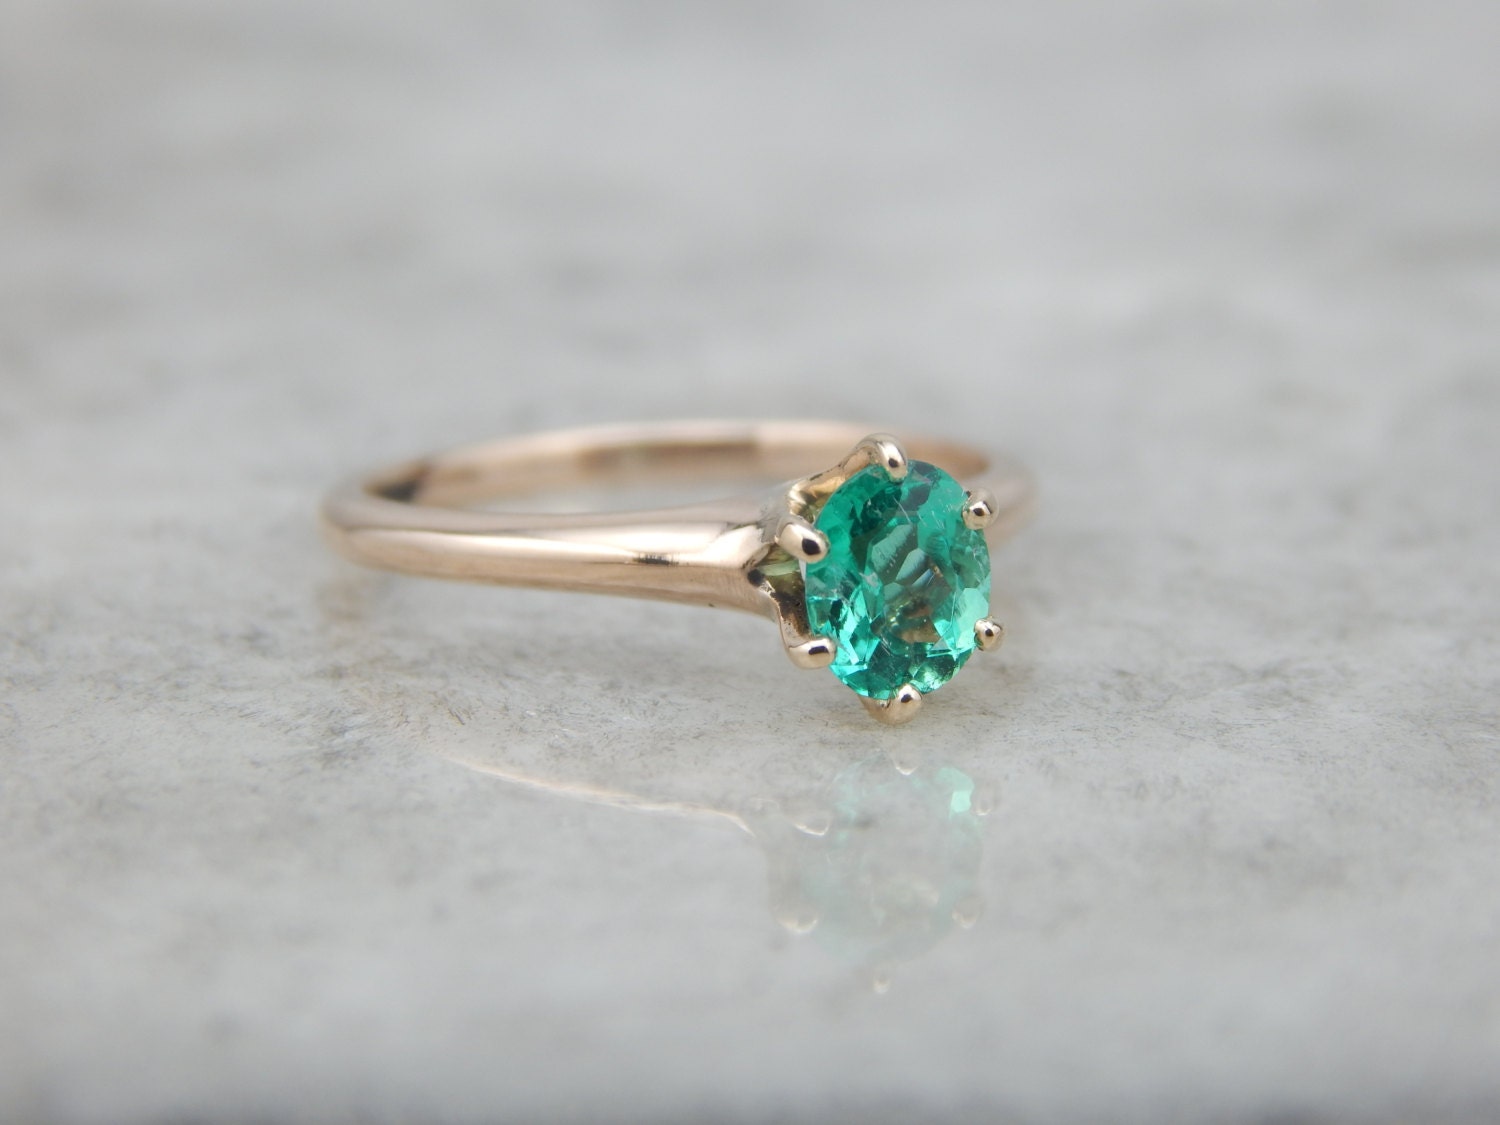 Vibrant Colombian Emerald in an Antique Solitaire Engagement | Etsy